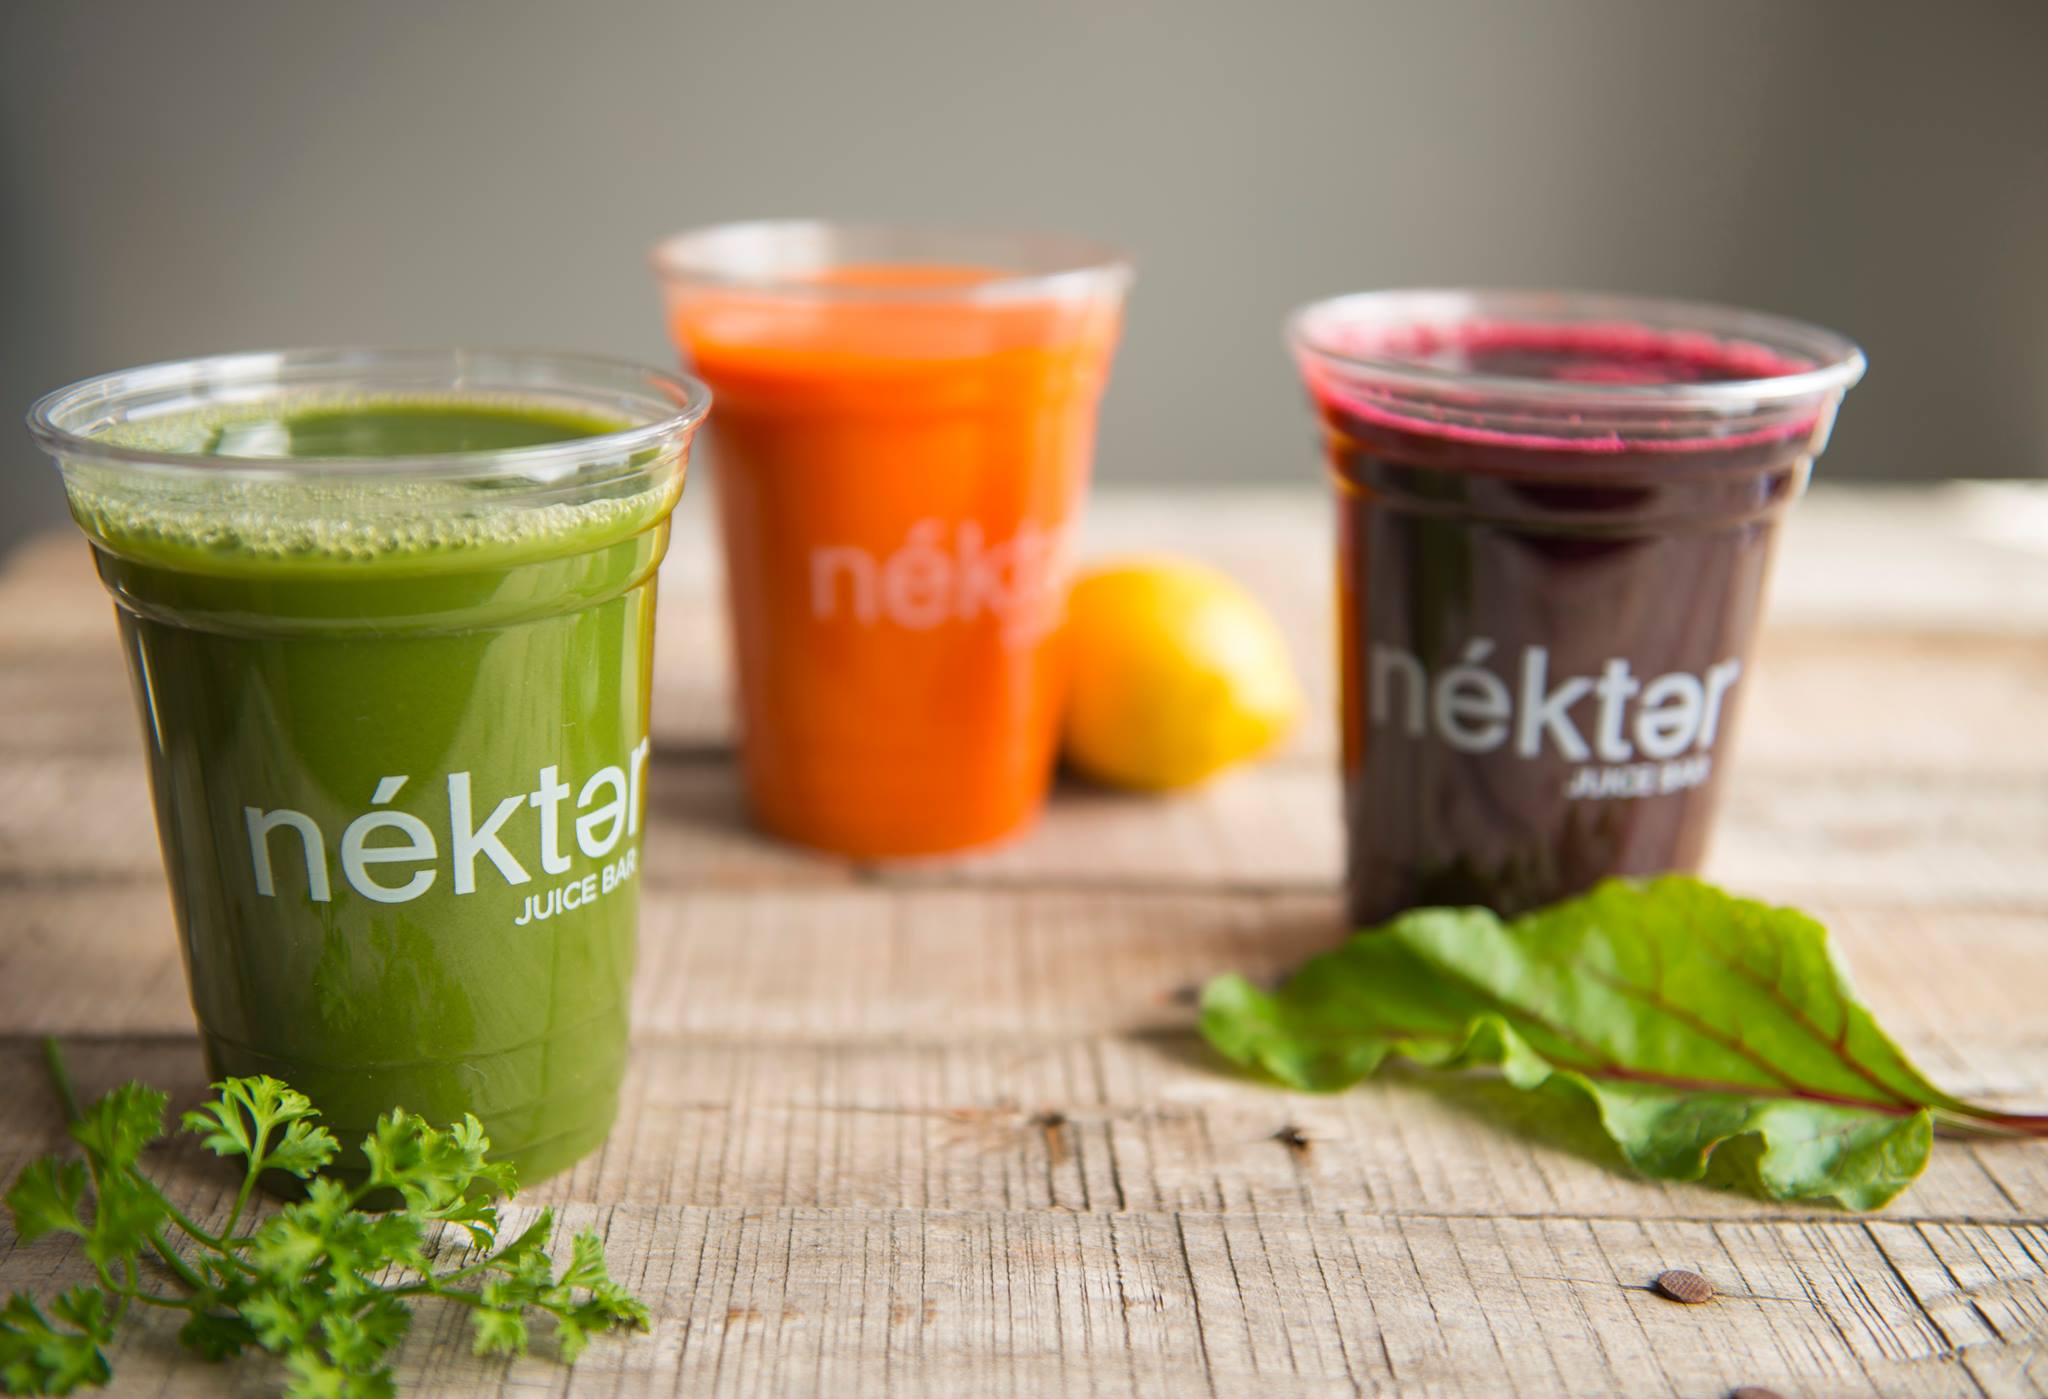 Coming Soon: Nekter Juice Bar at The Market Place